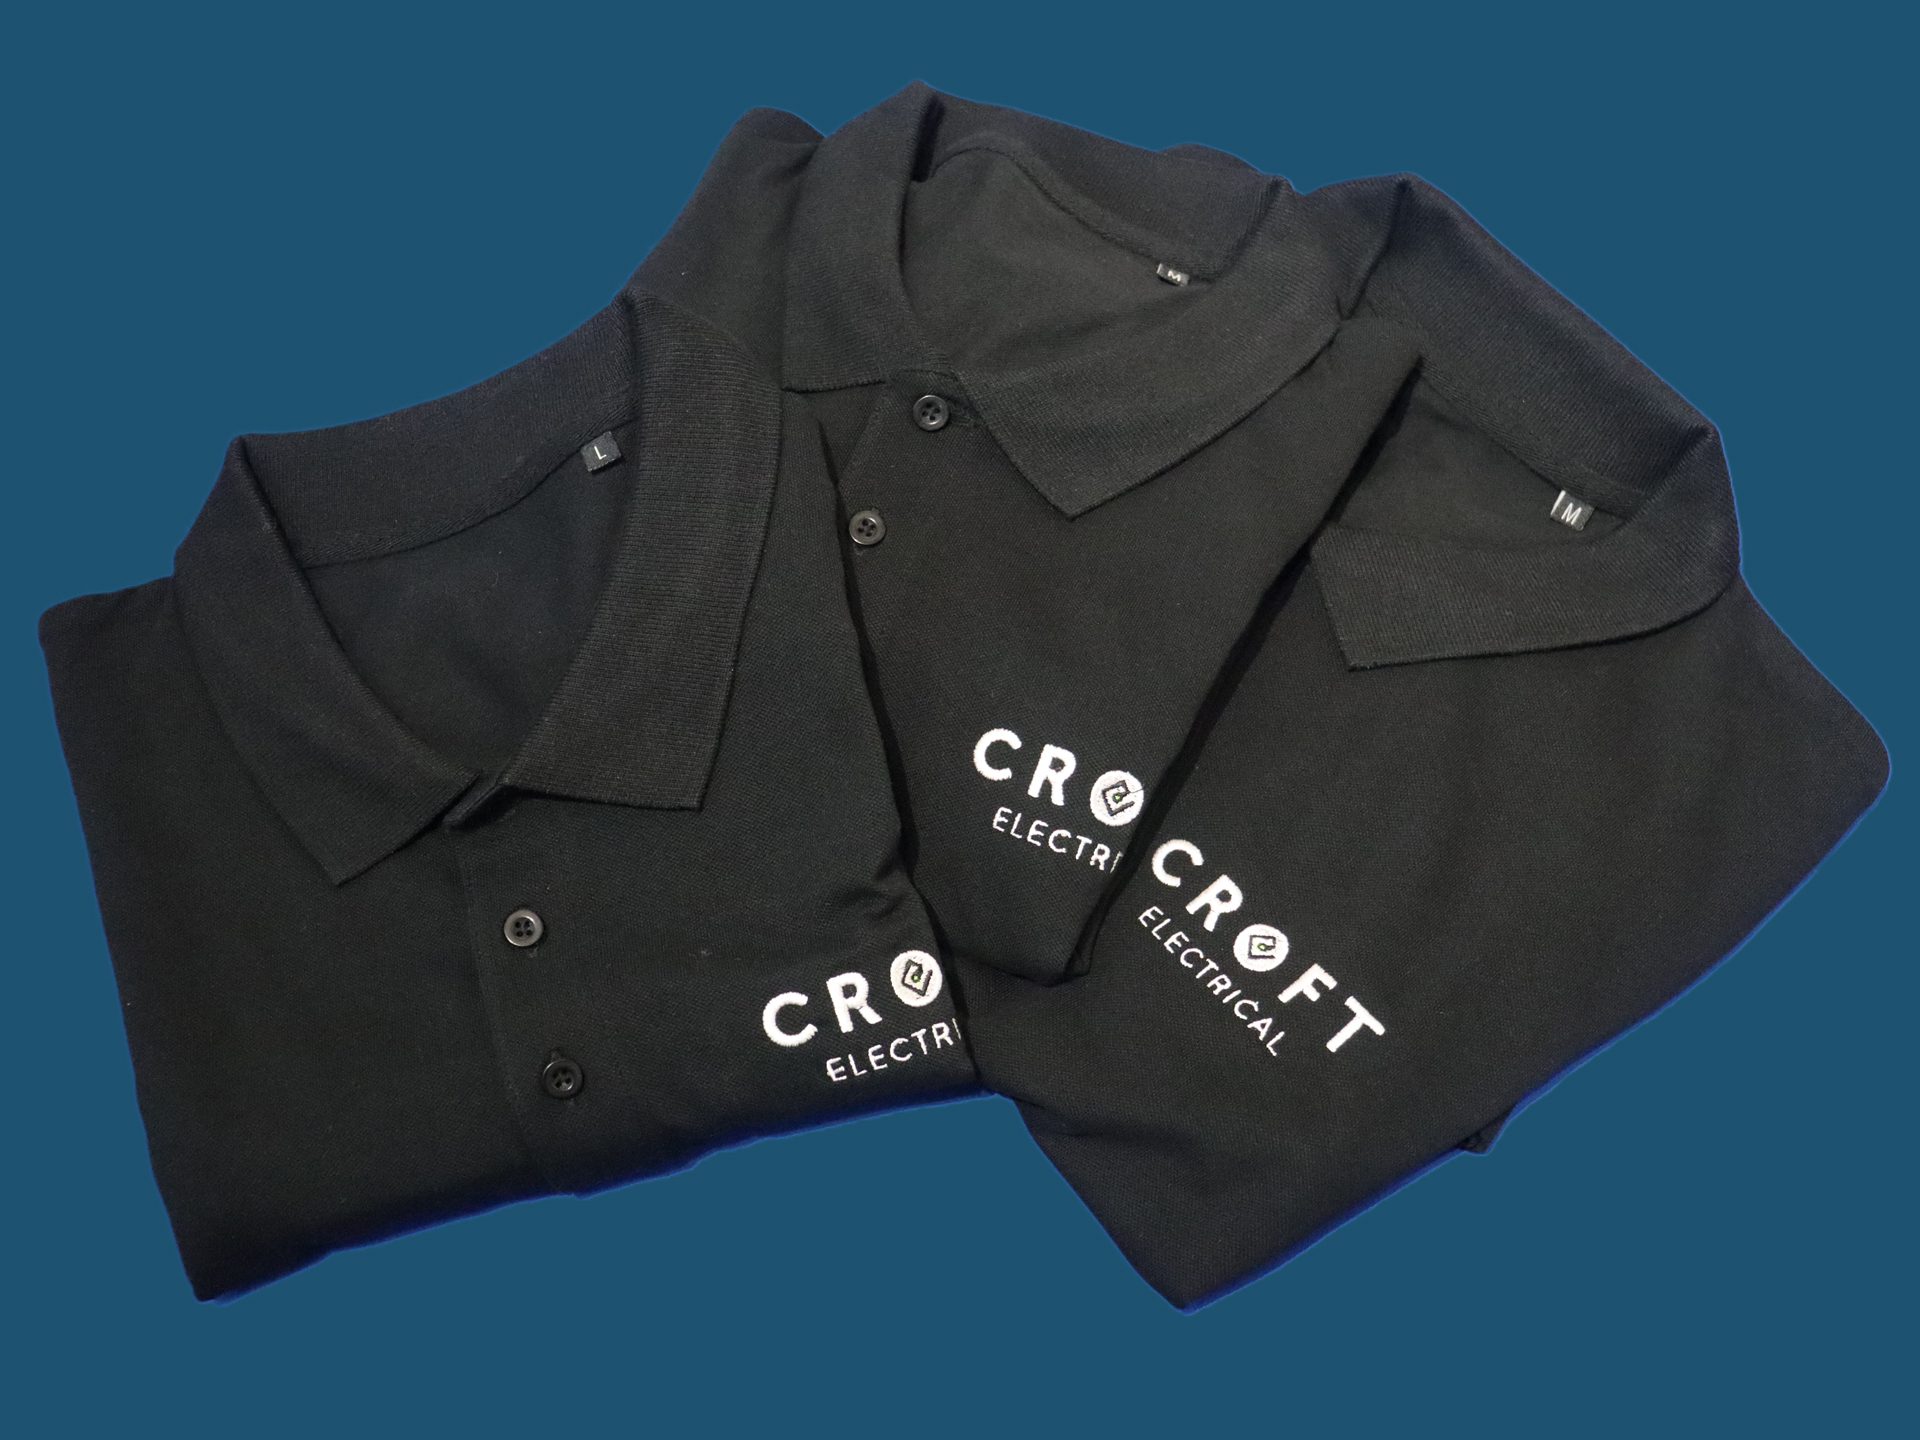 3 polo shirts embroidered with Croft Electrical's logo